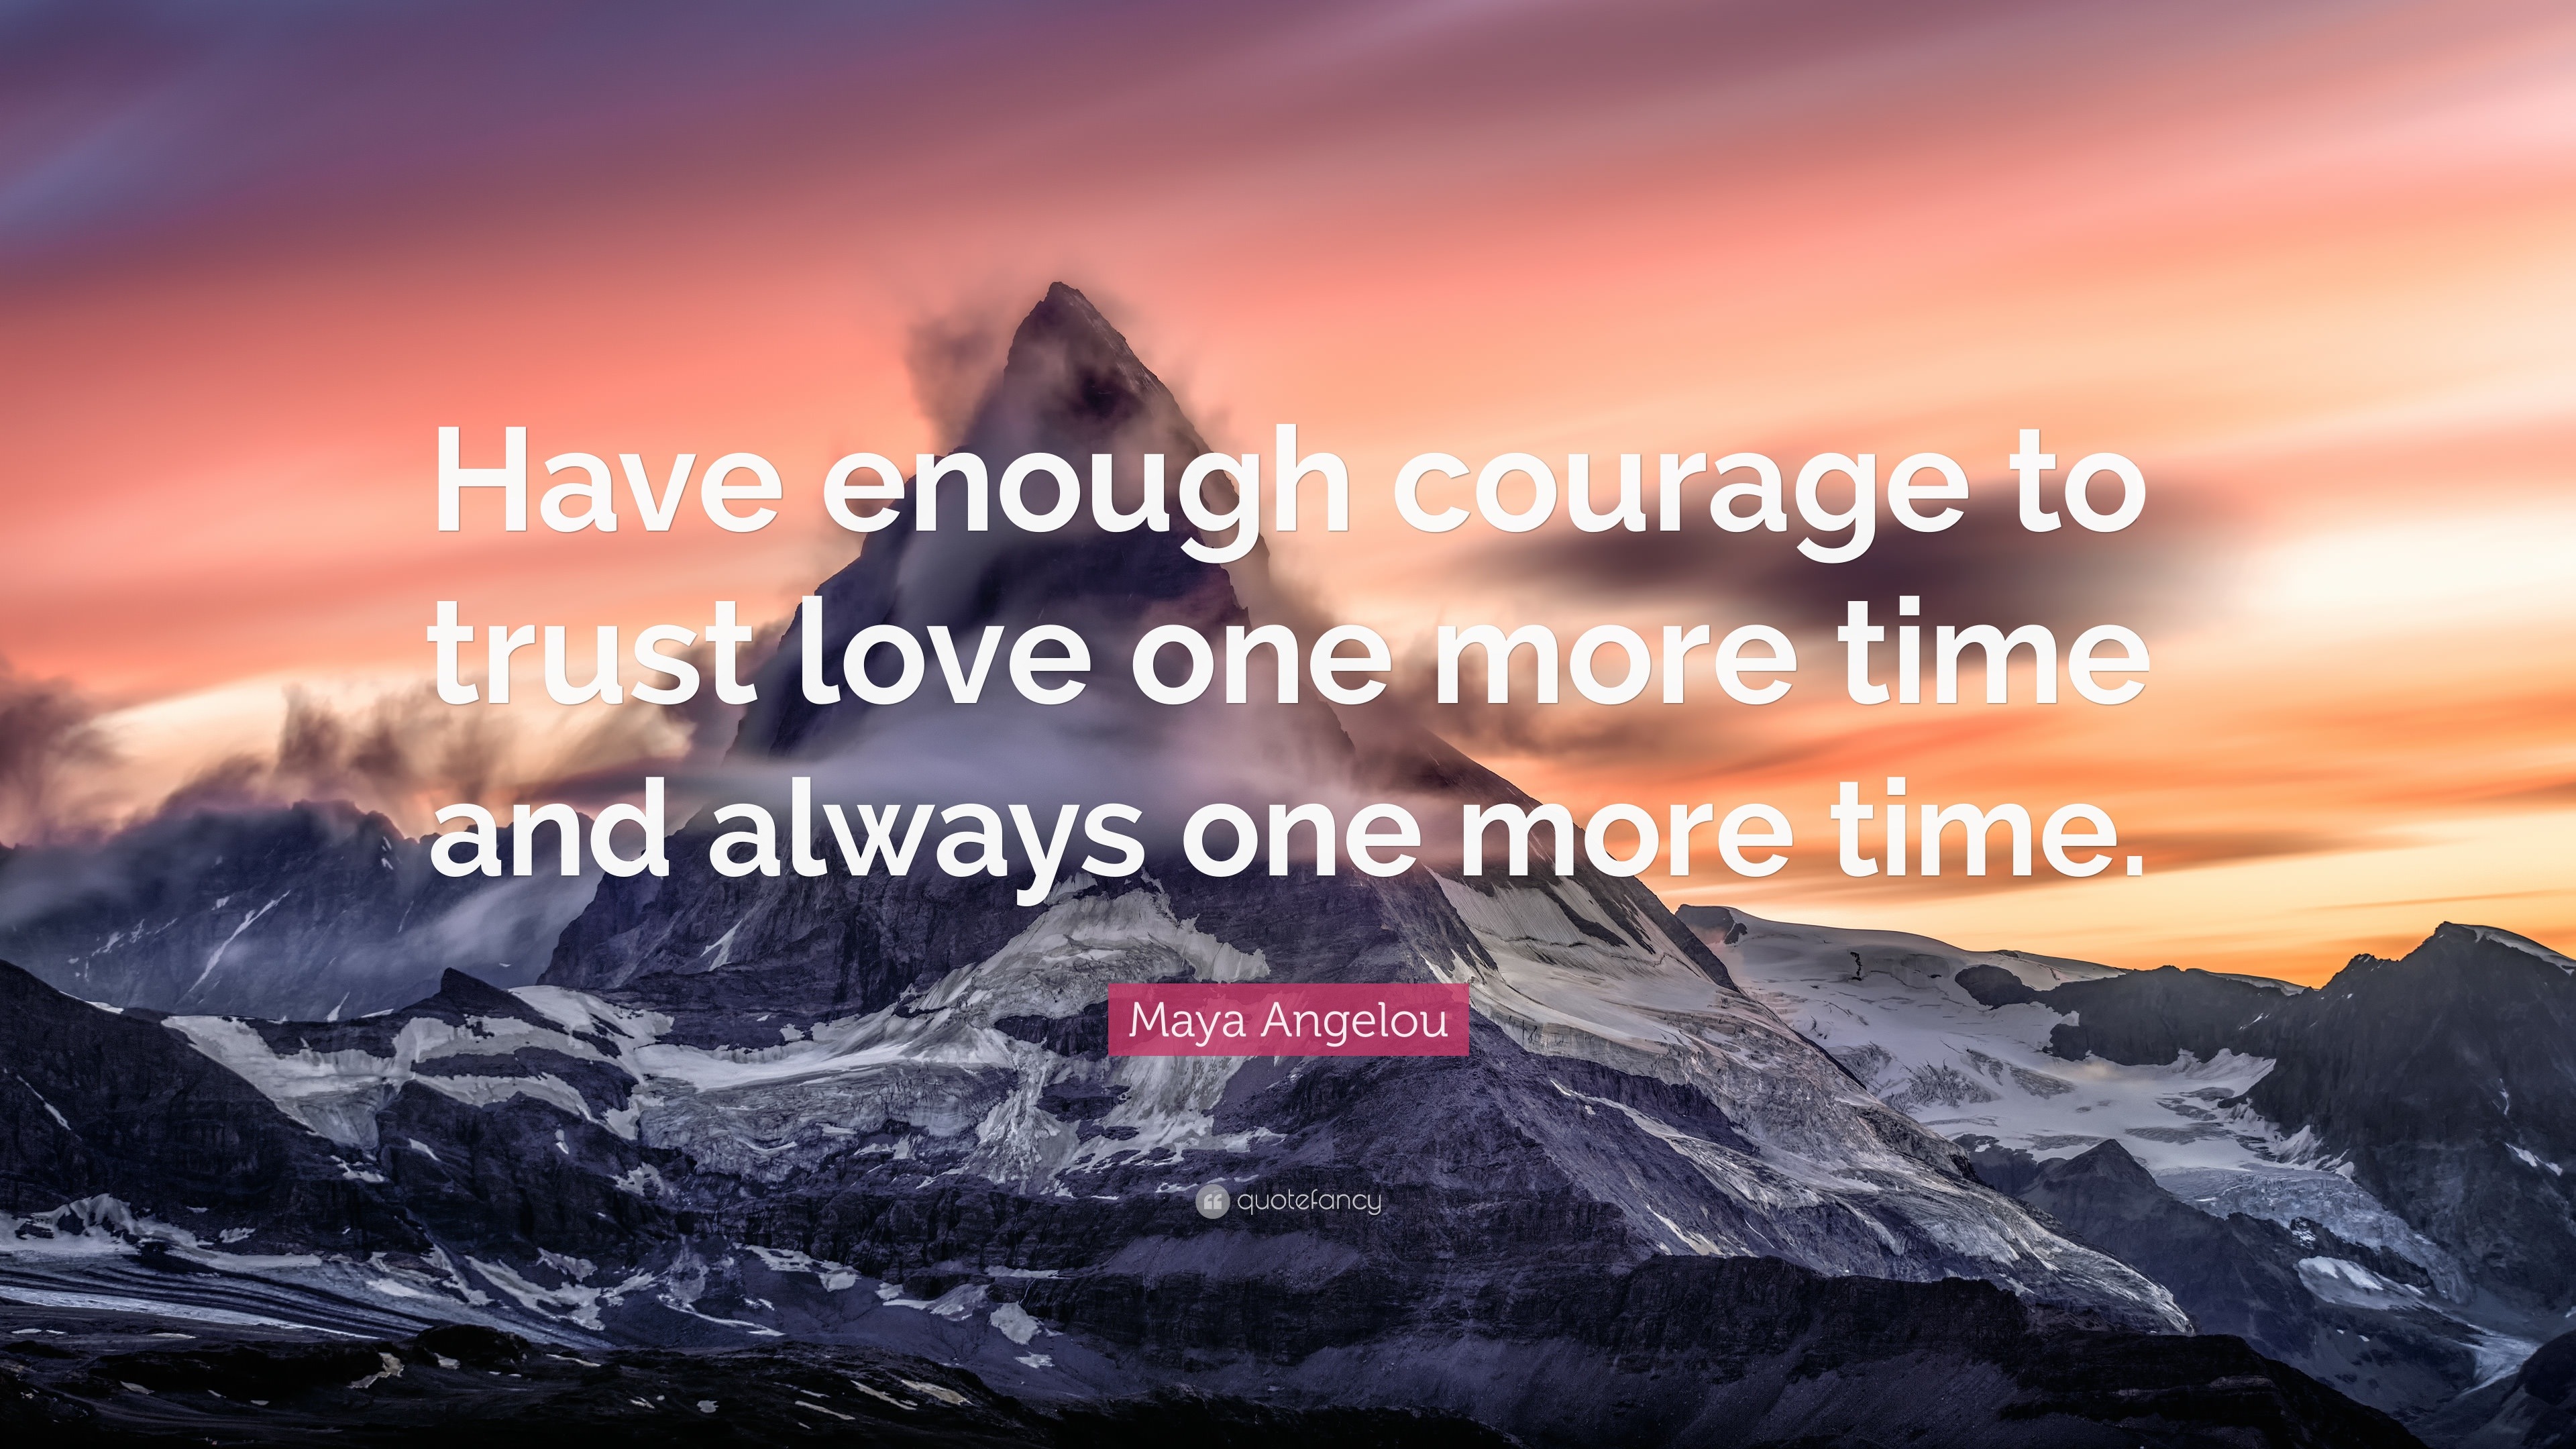 Maya Angelou Quote “Have enough courage to trust love one more time and always